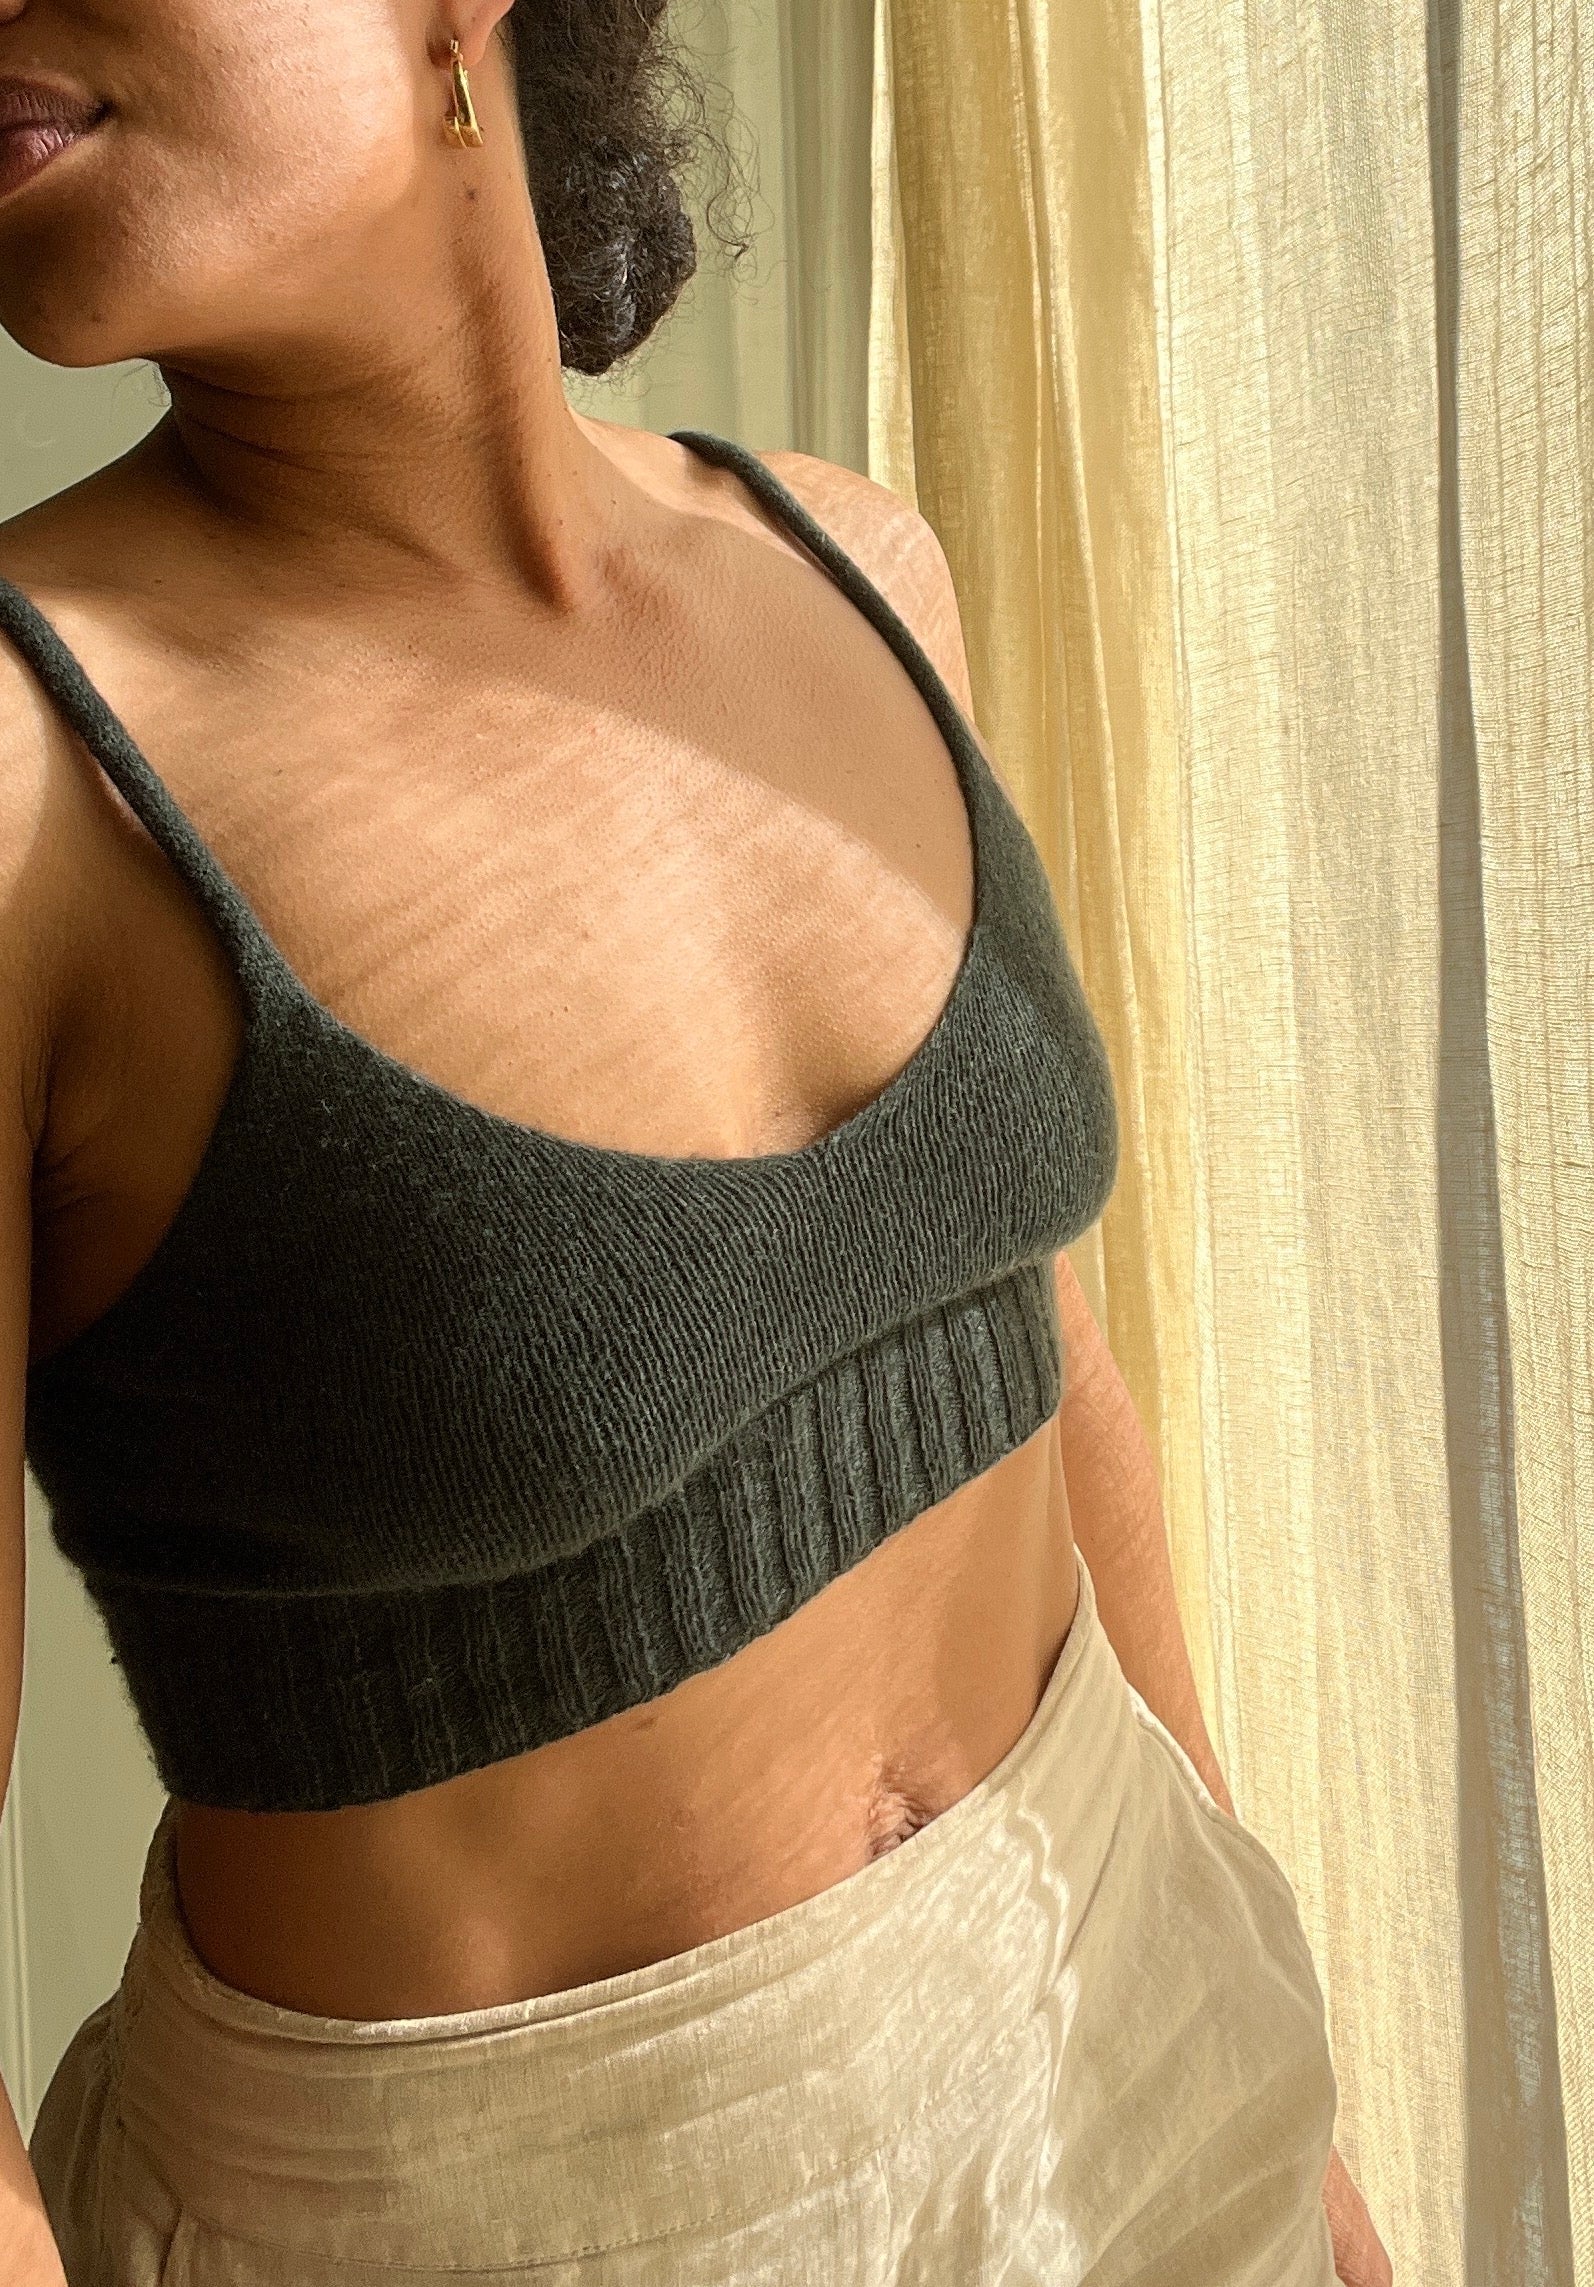 Stylish and Versatile Knit Bralette Pattern - Available in